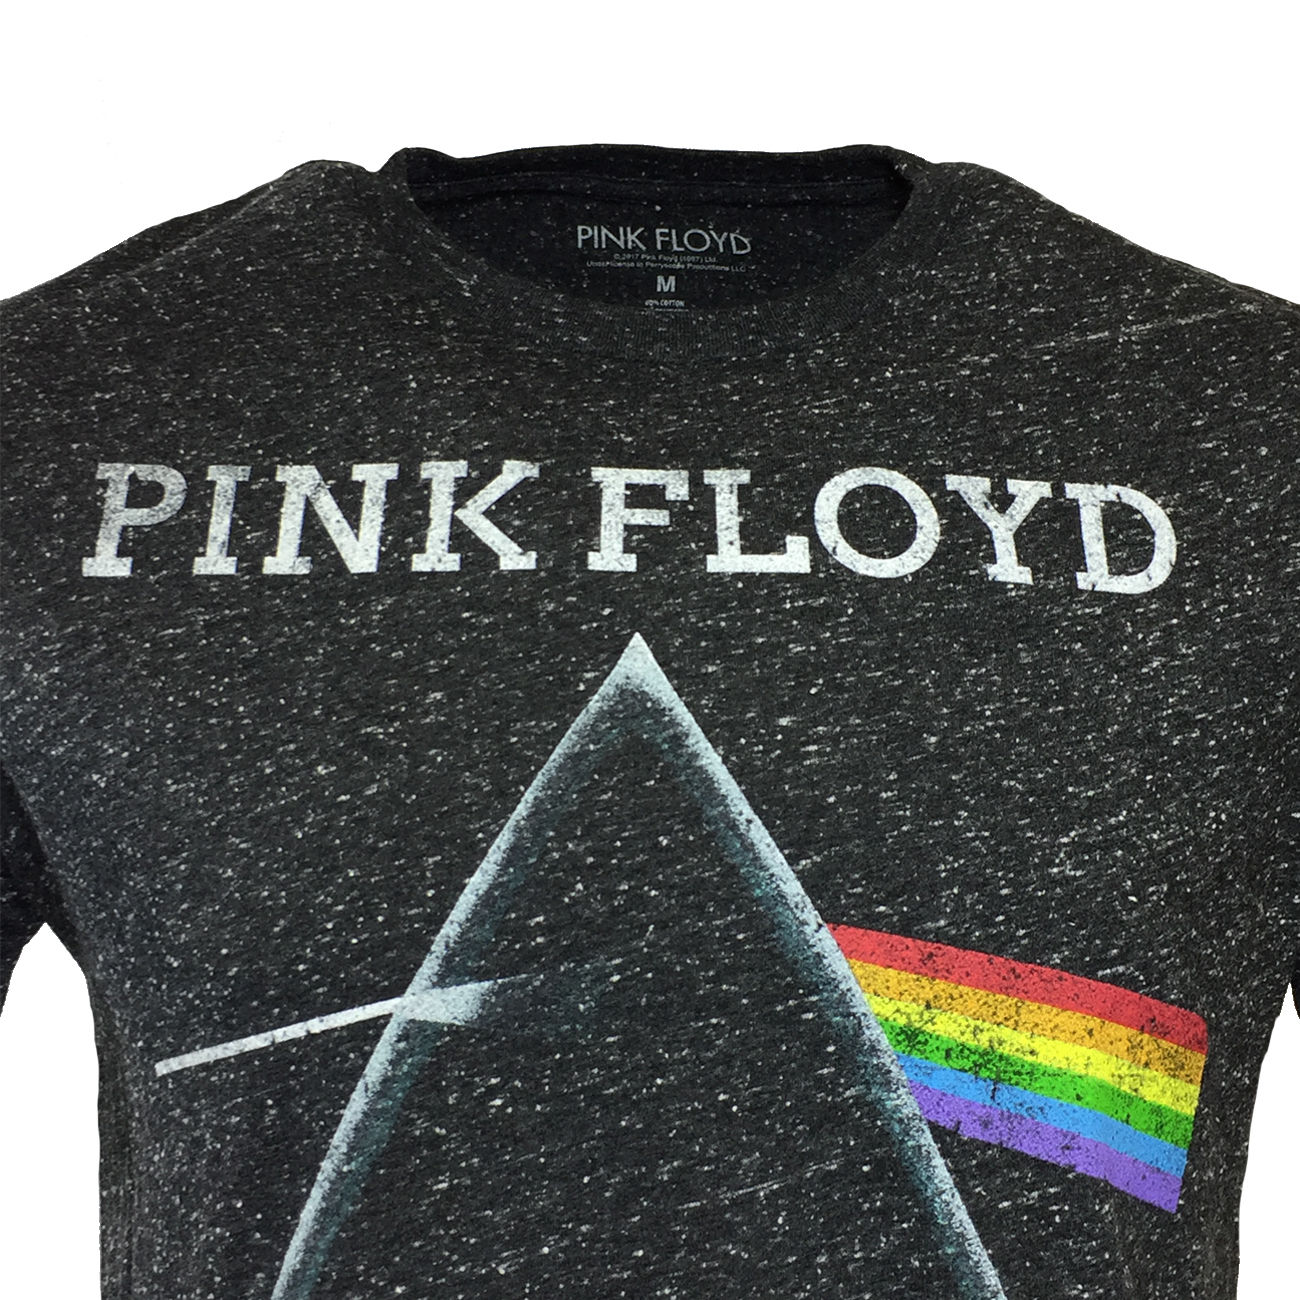 Pink Floyd Dark Side of the Moon Album Cover Graphic Print T-Shirt